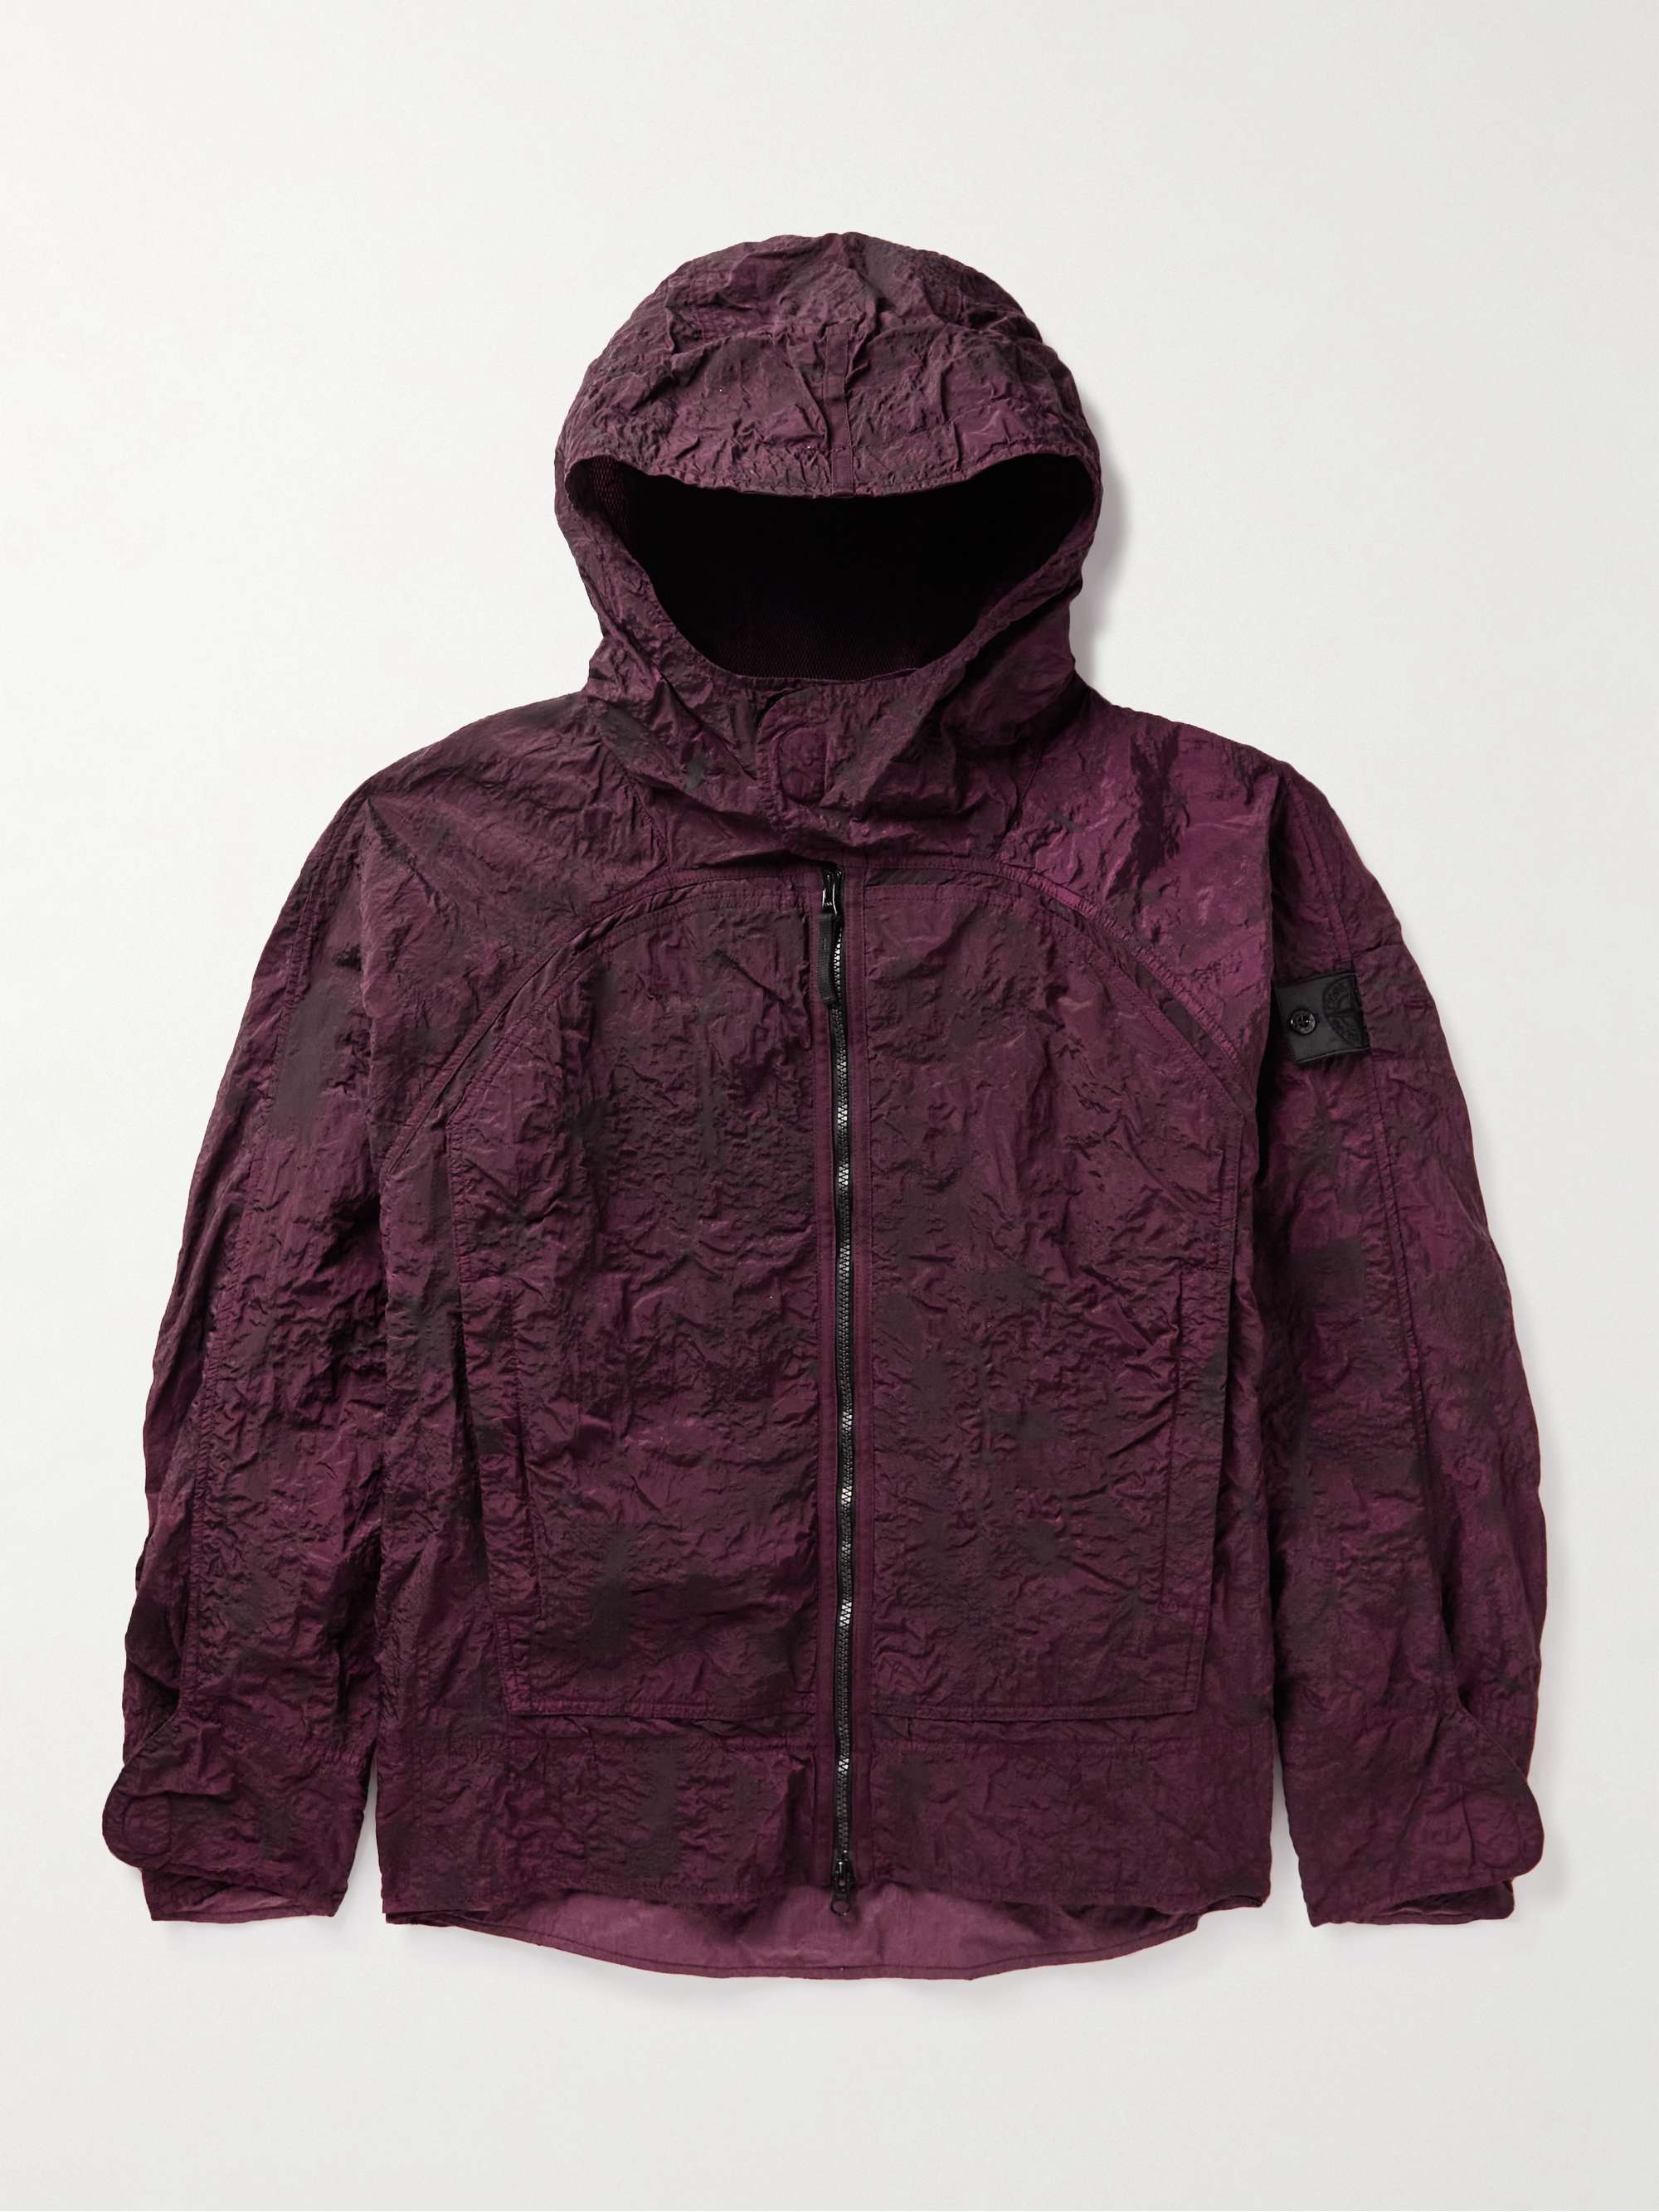 STONE ISLAND SHADOW PROJECT Crinkled Reps Nylon Hooded Jacket | MR PORTER